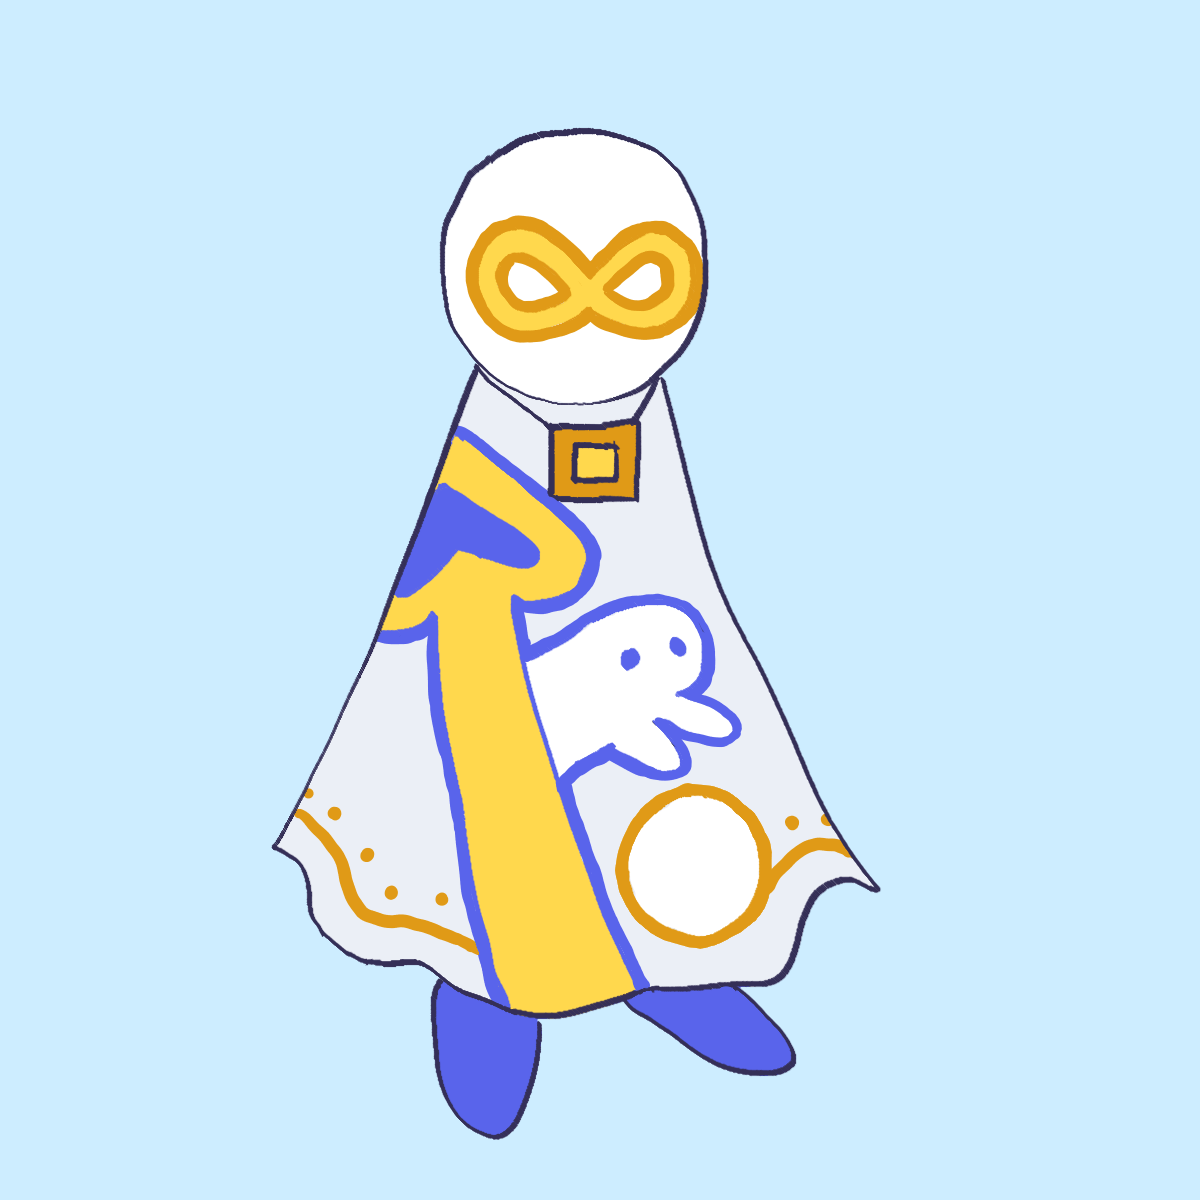 a cloaked humanoid figure. on its face is an infinity symbol, it wears a necklace with a square pendant, and its cloak has images of an upward arrow, a minimalistic animal, and a circle on it. its color scheme is white, gold, and blue.